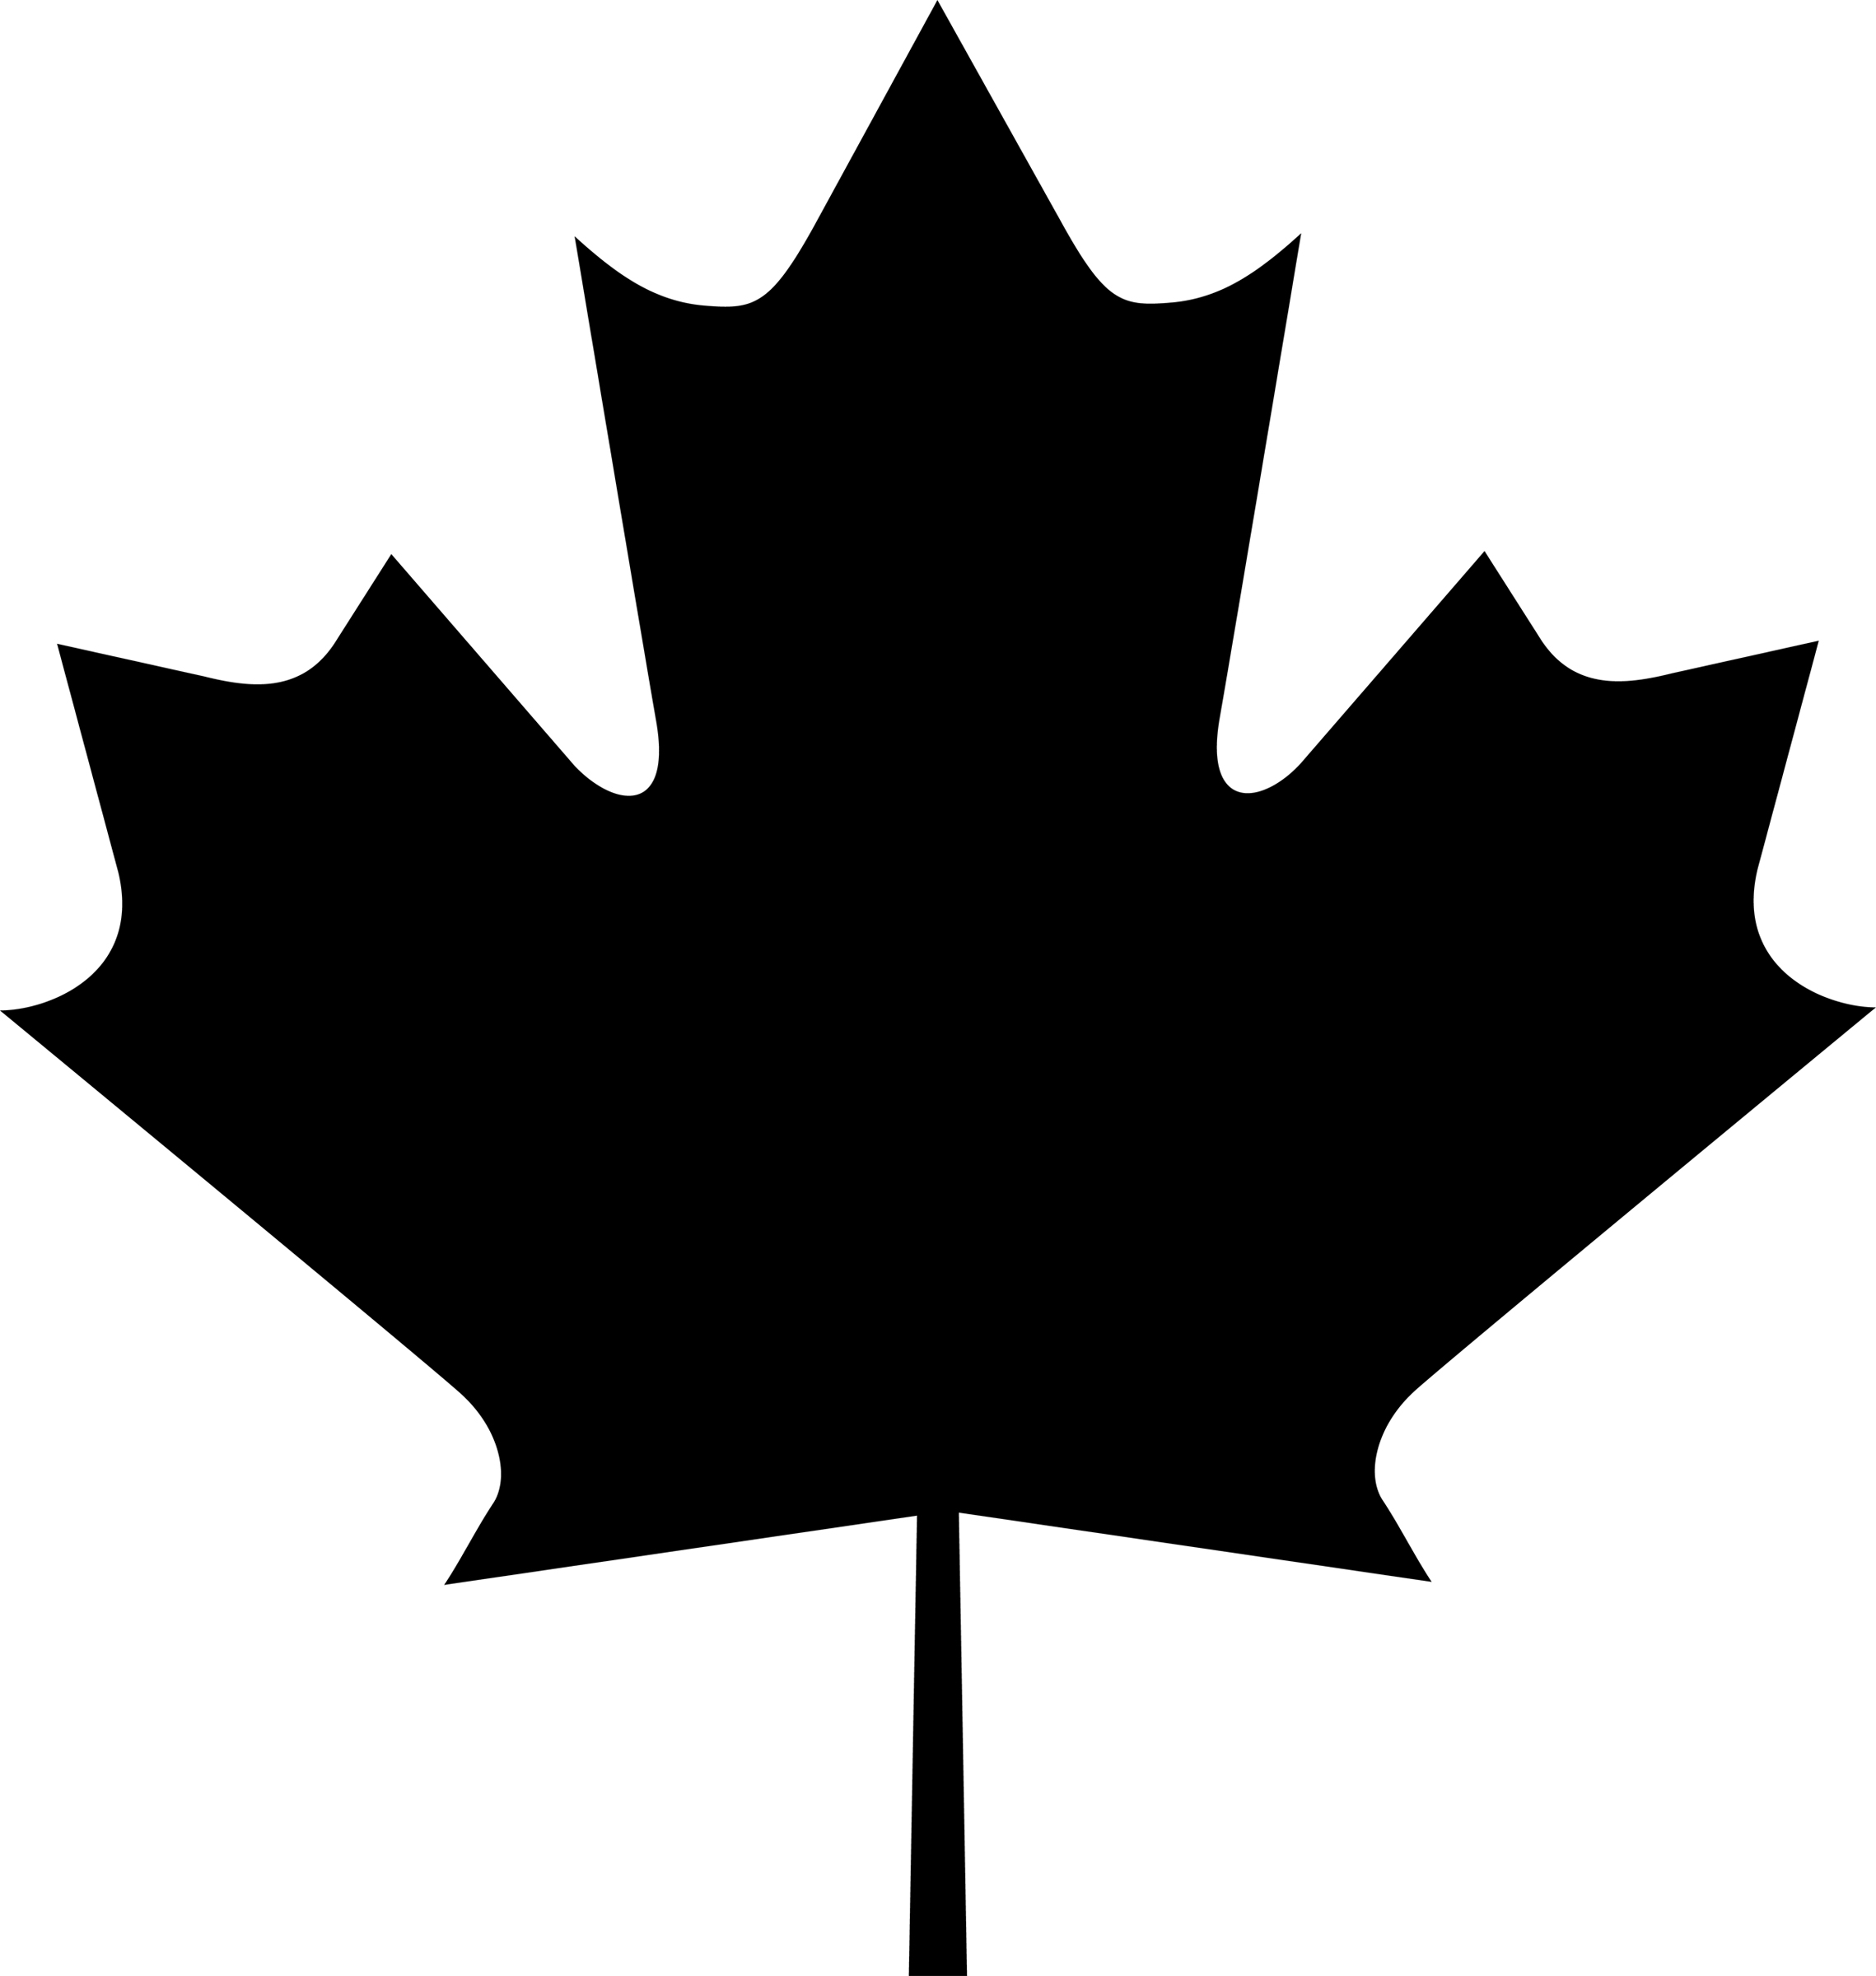 Free Maple Leaf Cliparts, Download Free Clip Art, Free Clip.